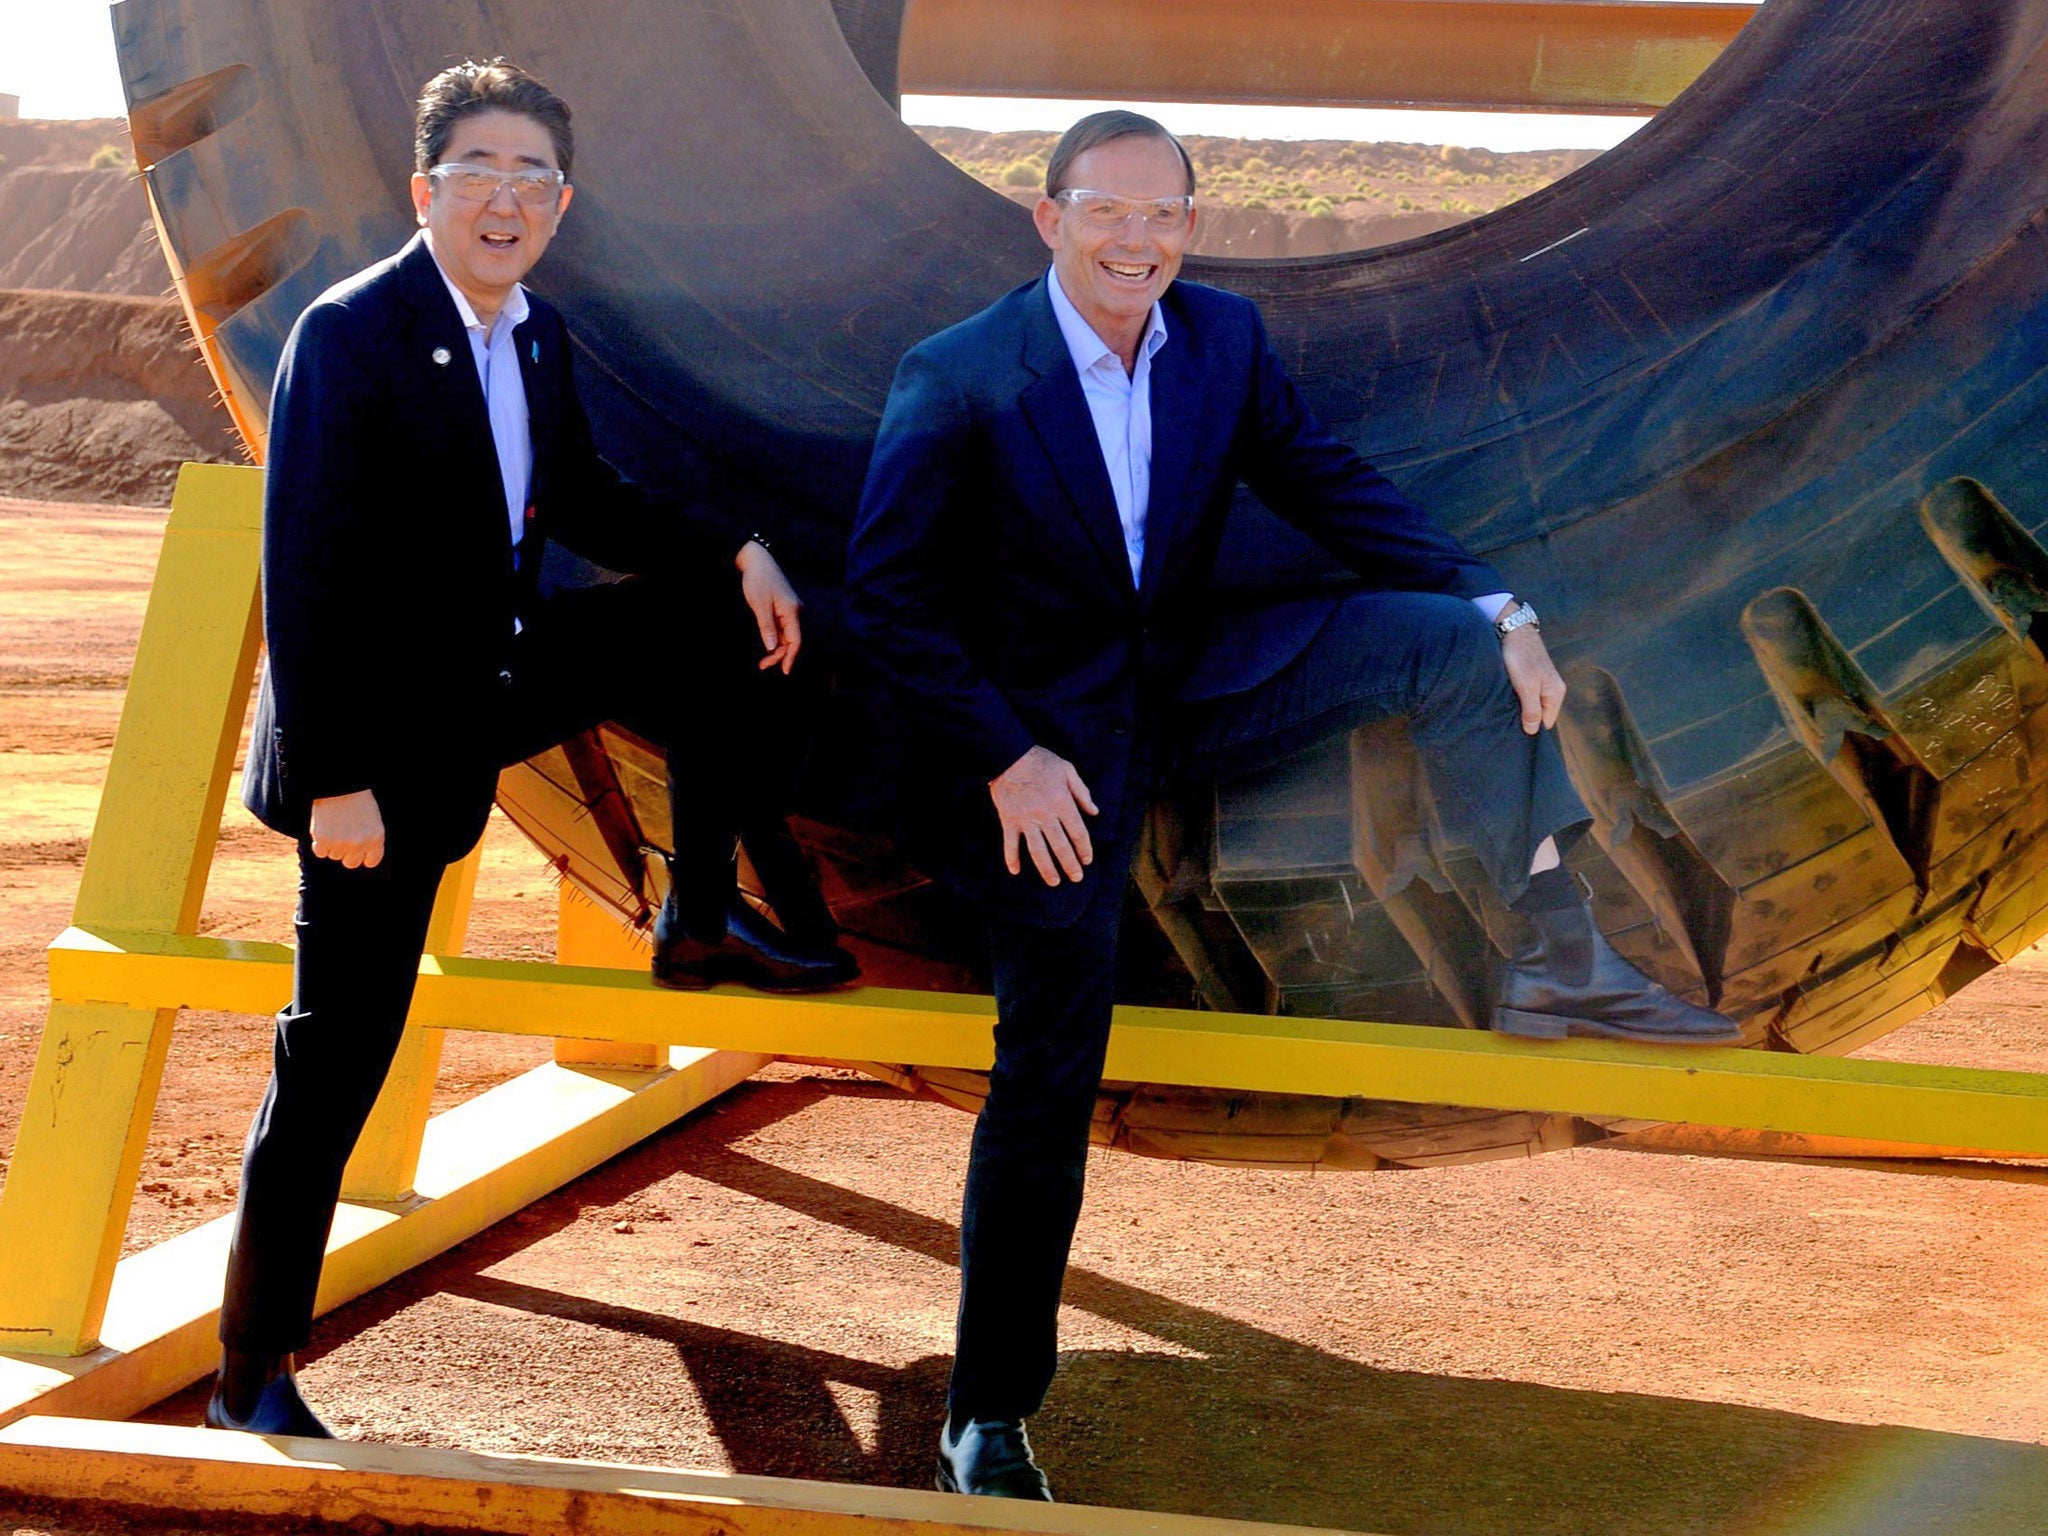 Australian Prime Minister Tony Abbott (R) and Japanese Prime Minister Shinzo Abe pose for a photograph next to a haulage truck tyre during a tour of Rio Tinto's West Angelas iron ore mine in Pilbara, Western Australia on July 9, 2014